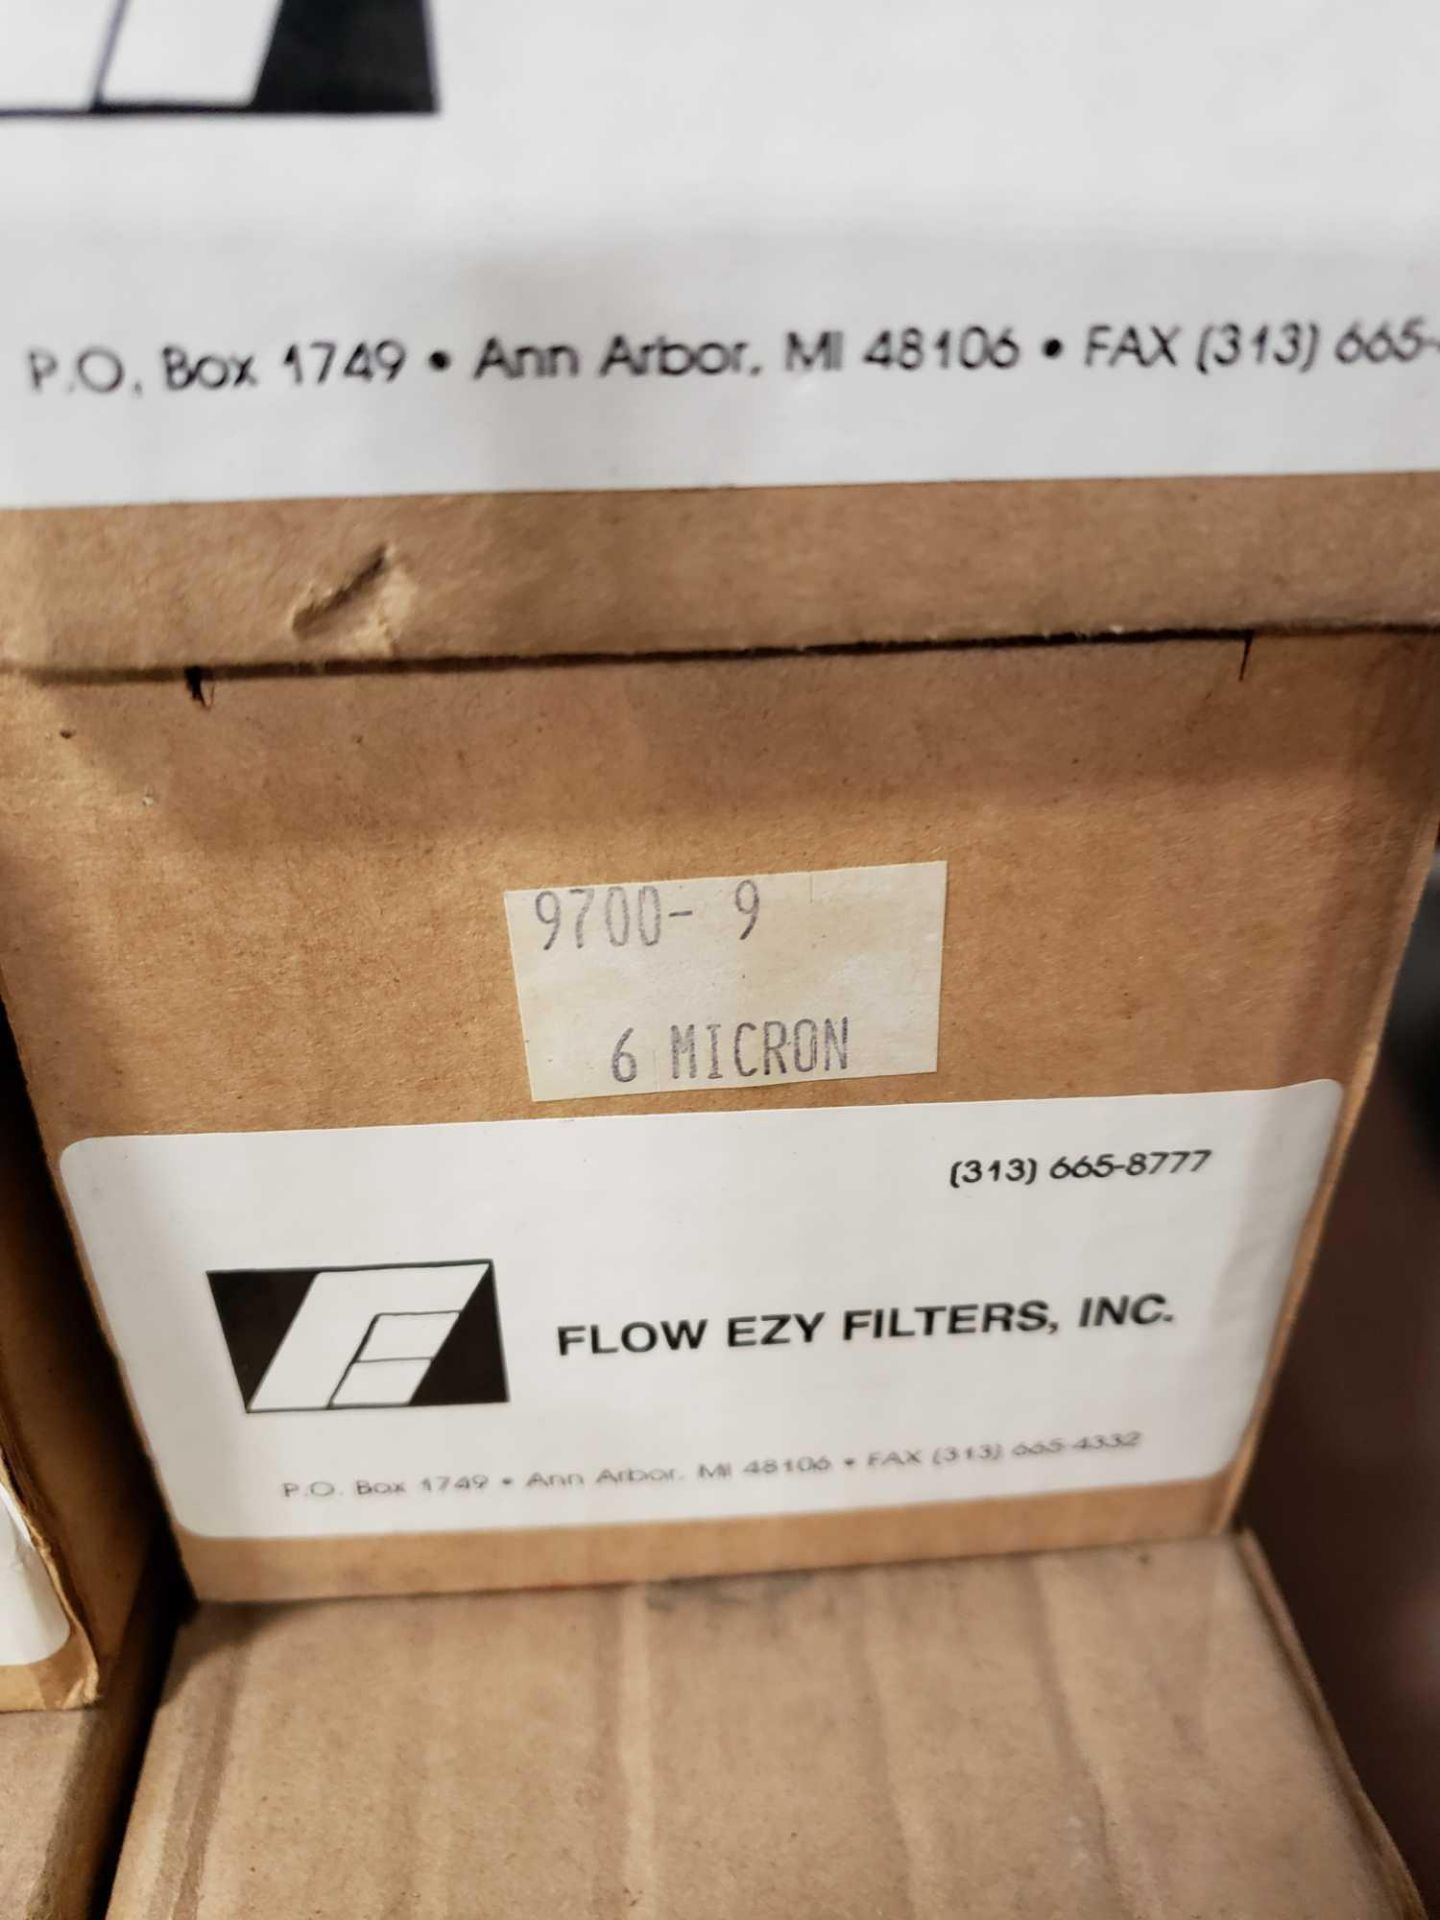 Qty 6 - Flow Ezy Filters model 9700-9. New in box. - Image 2 of 3